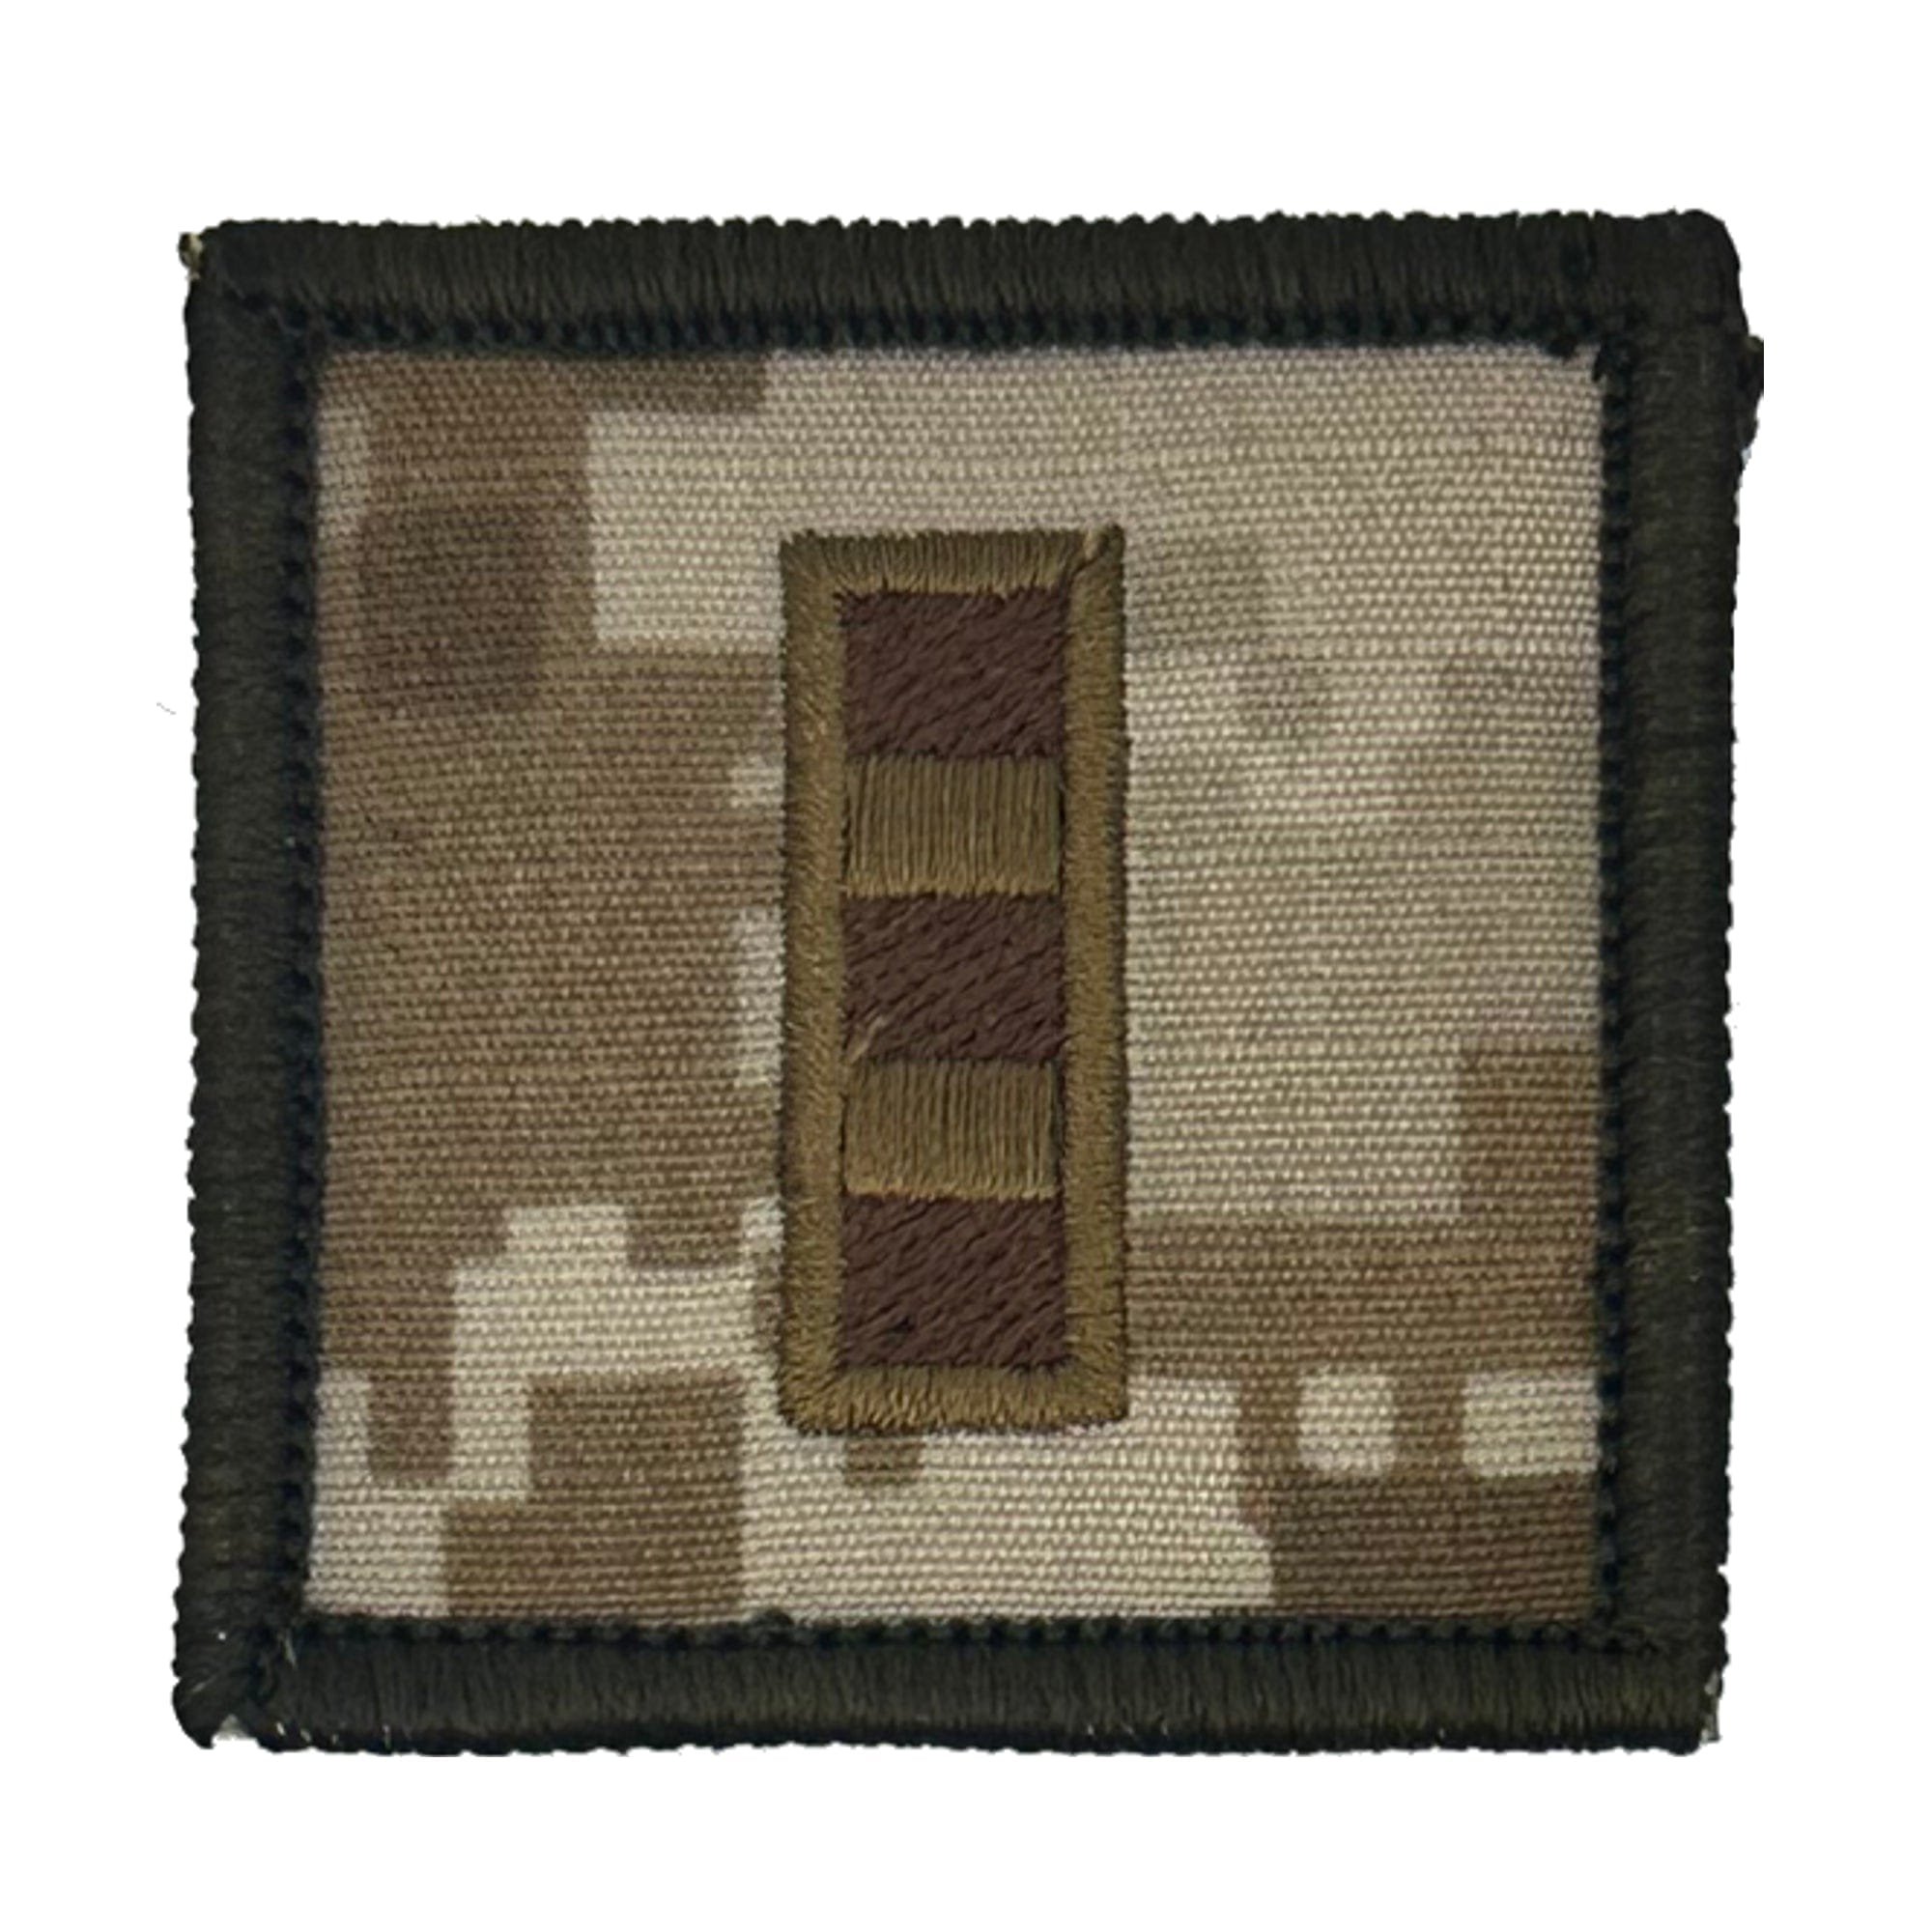 Tactical Gear Junkie Patches MARPAT Desert / Chief Warrant Officer 2 USMC Rank Insignia - 2x2 Patch